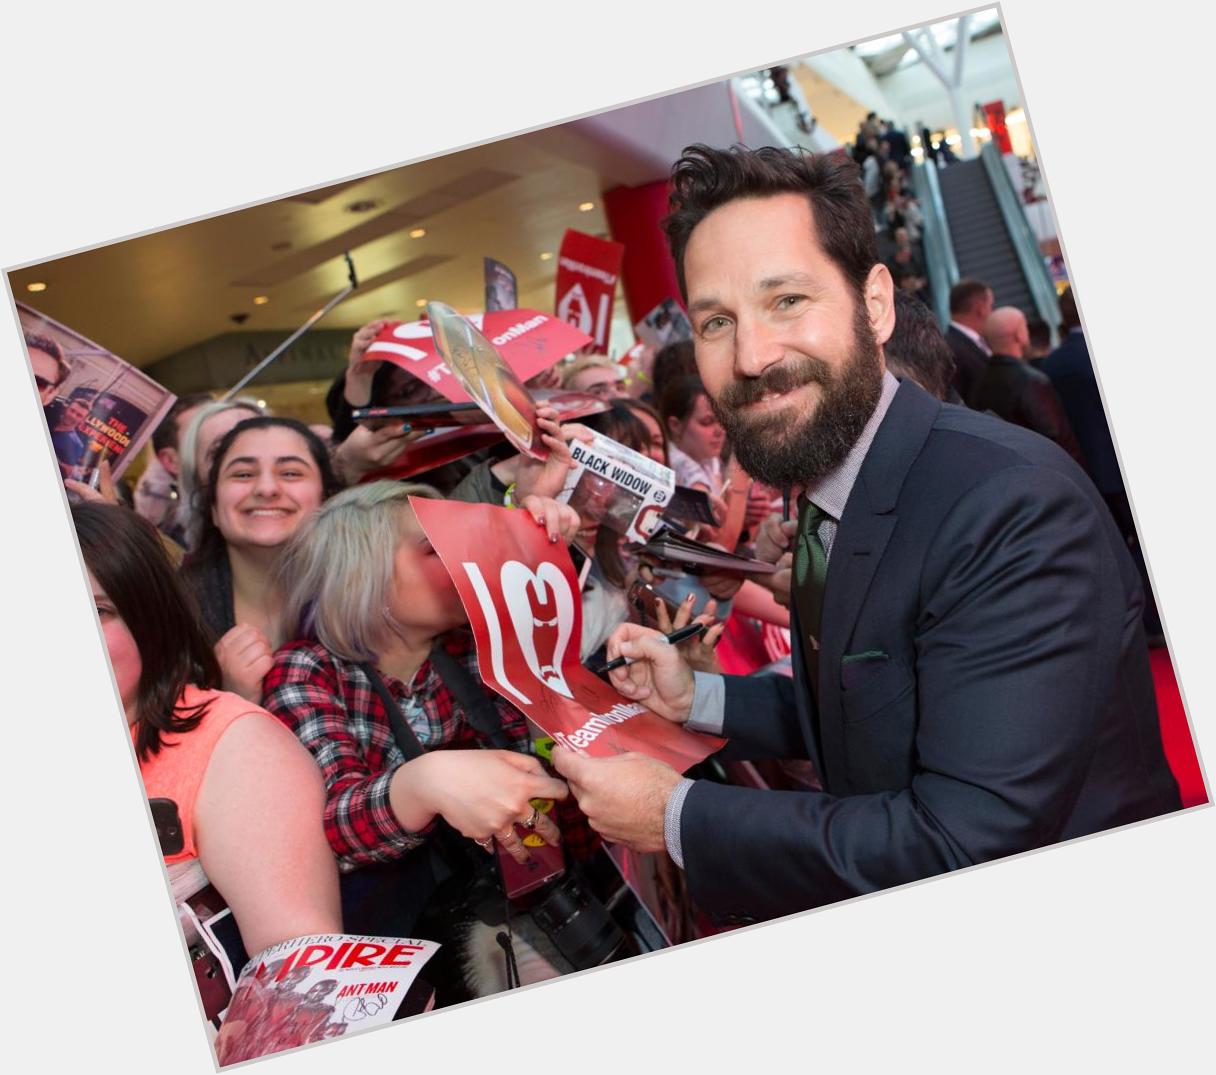 Join us in wishing Paul Rudd a Happy Birthday! He\ll think you for thanking of him. 